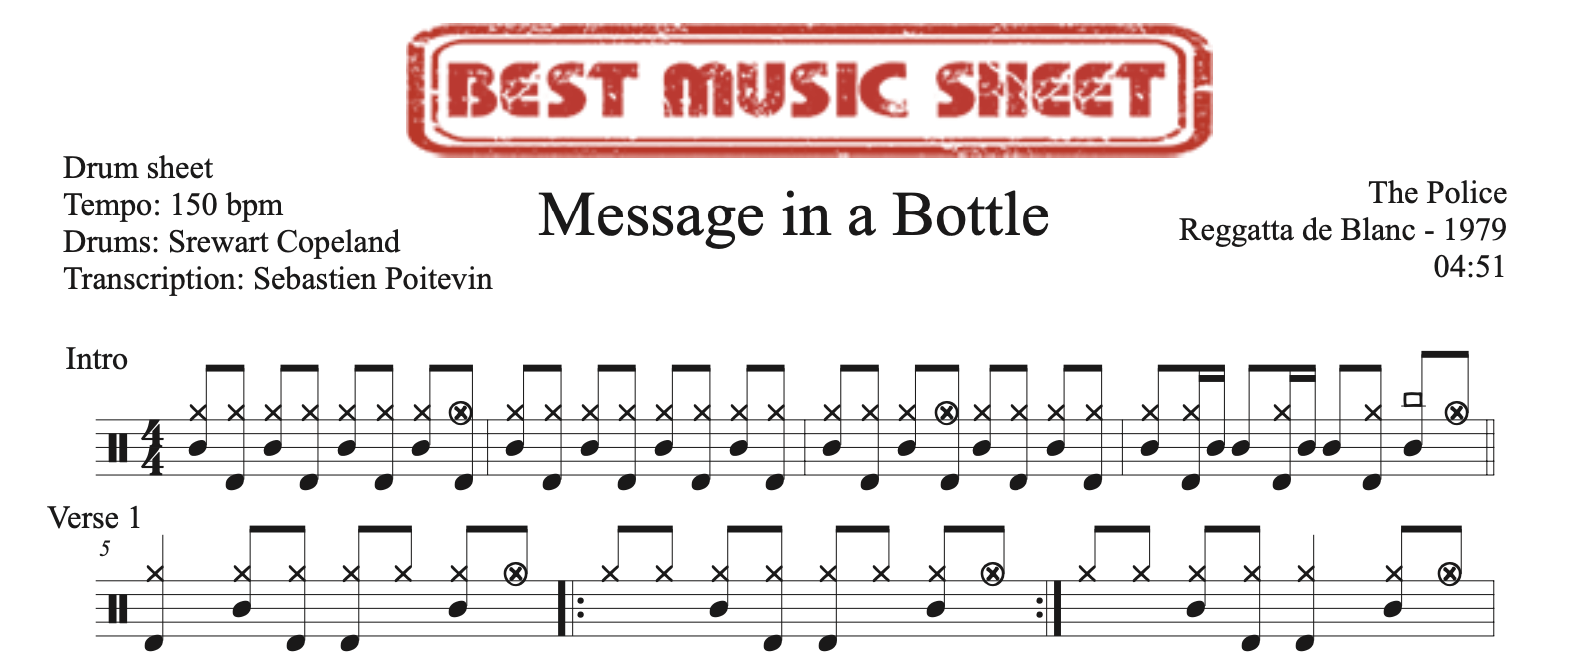 Sample drum sheet of Message in a Bottle by The Police